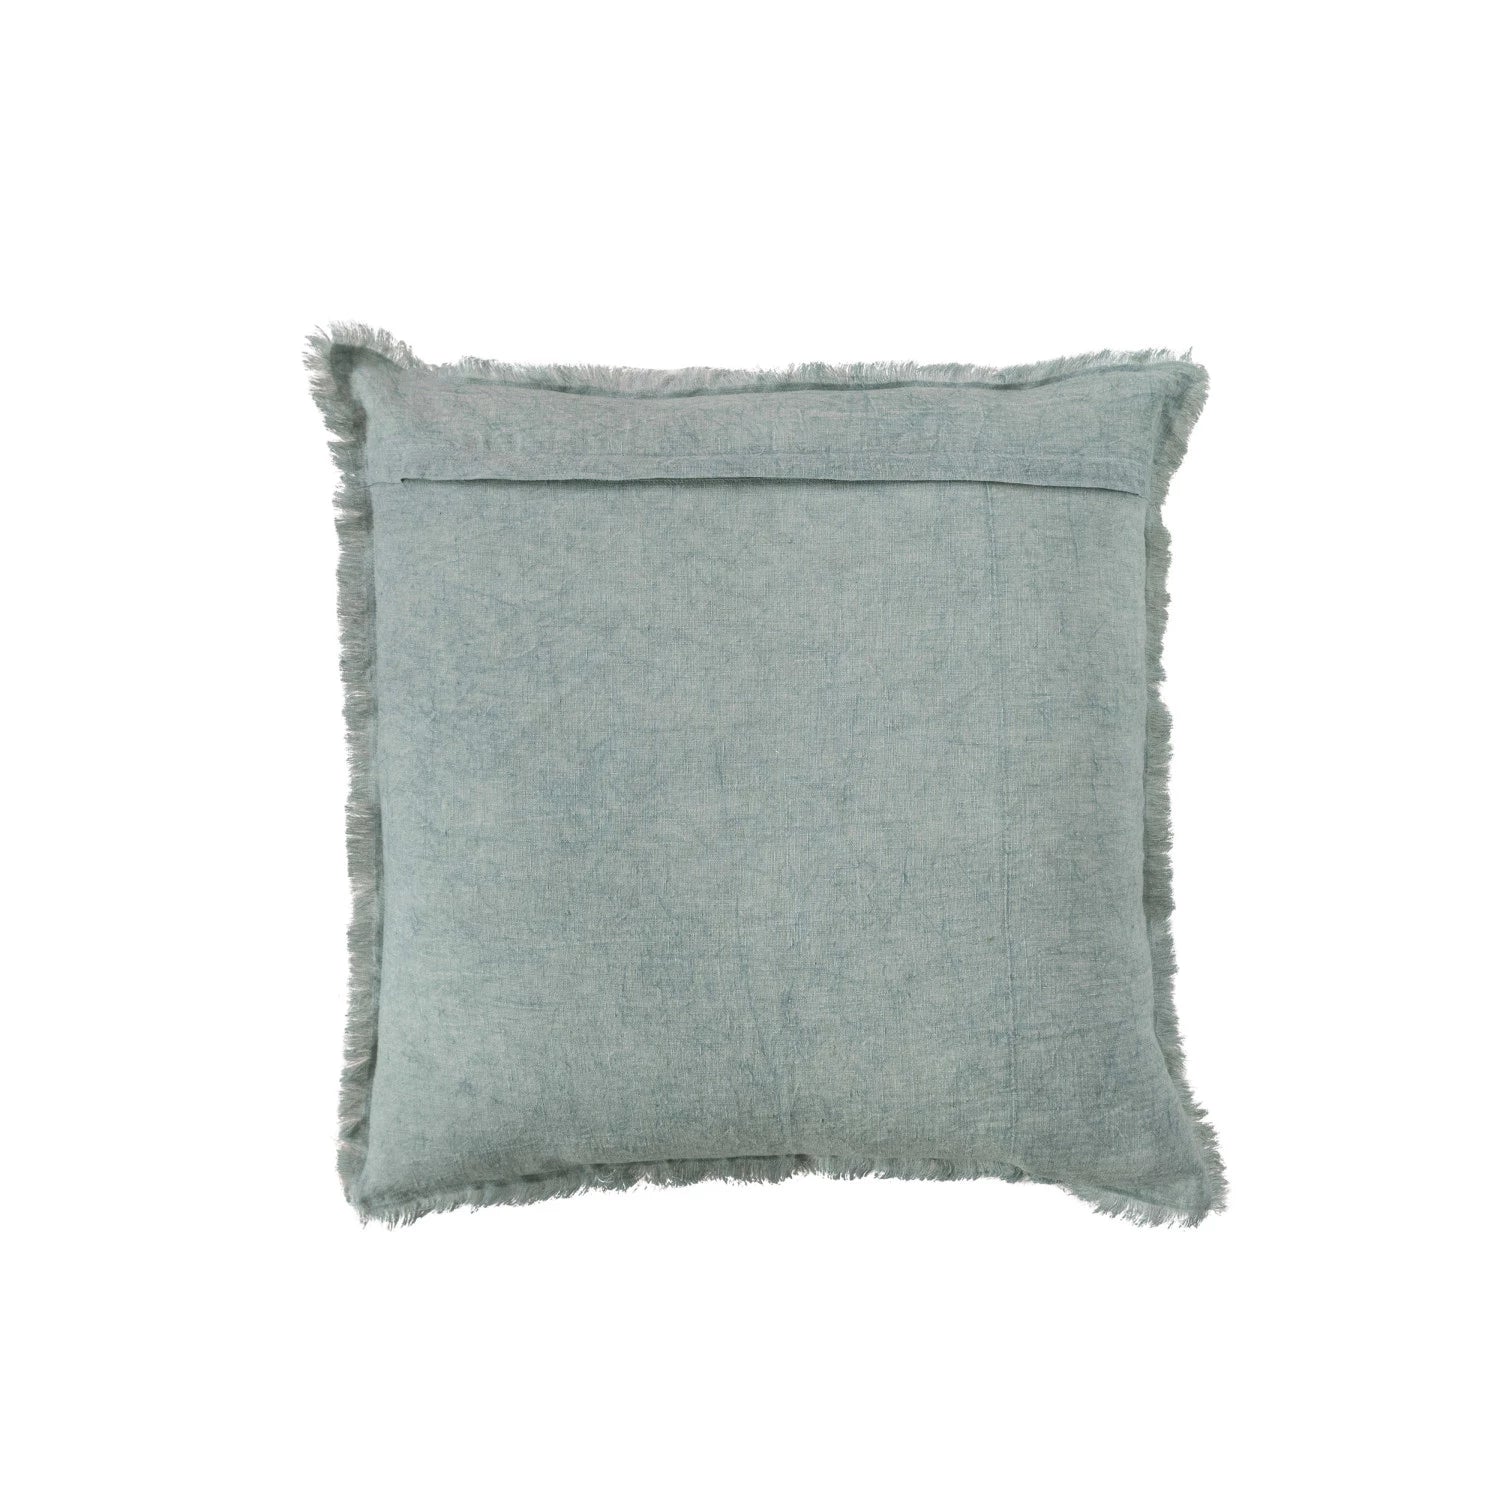 20" Square Stonewashed Linen Pillow with Fringe